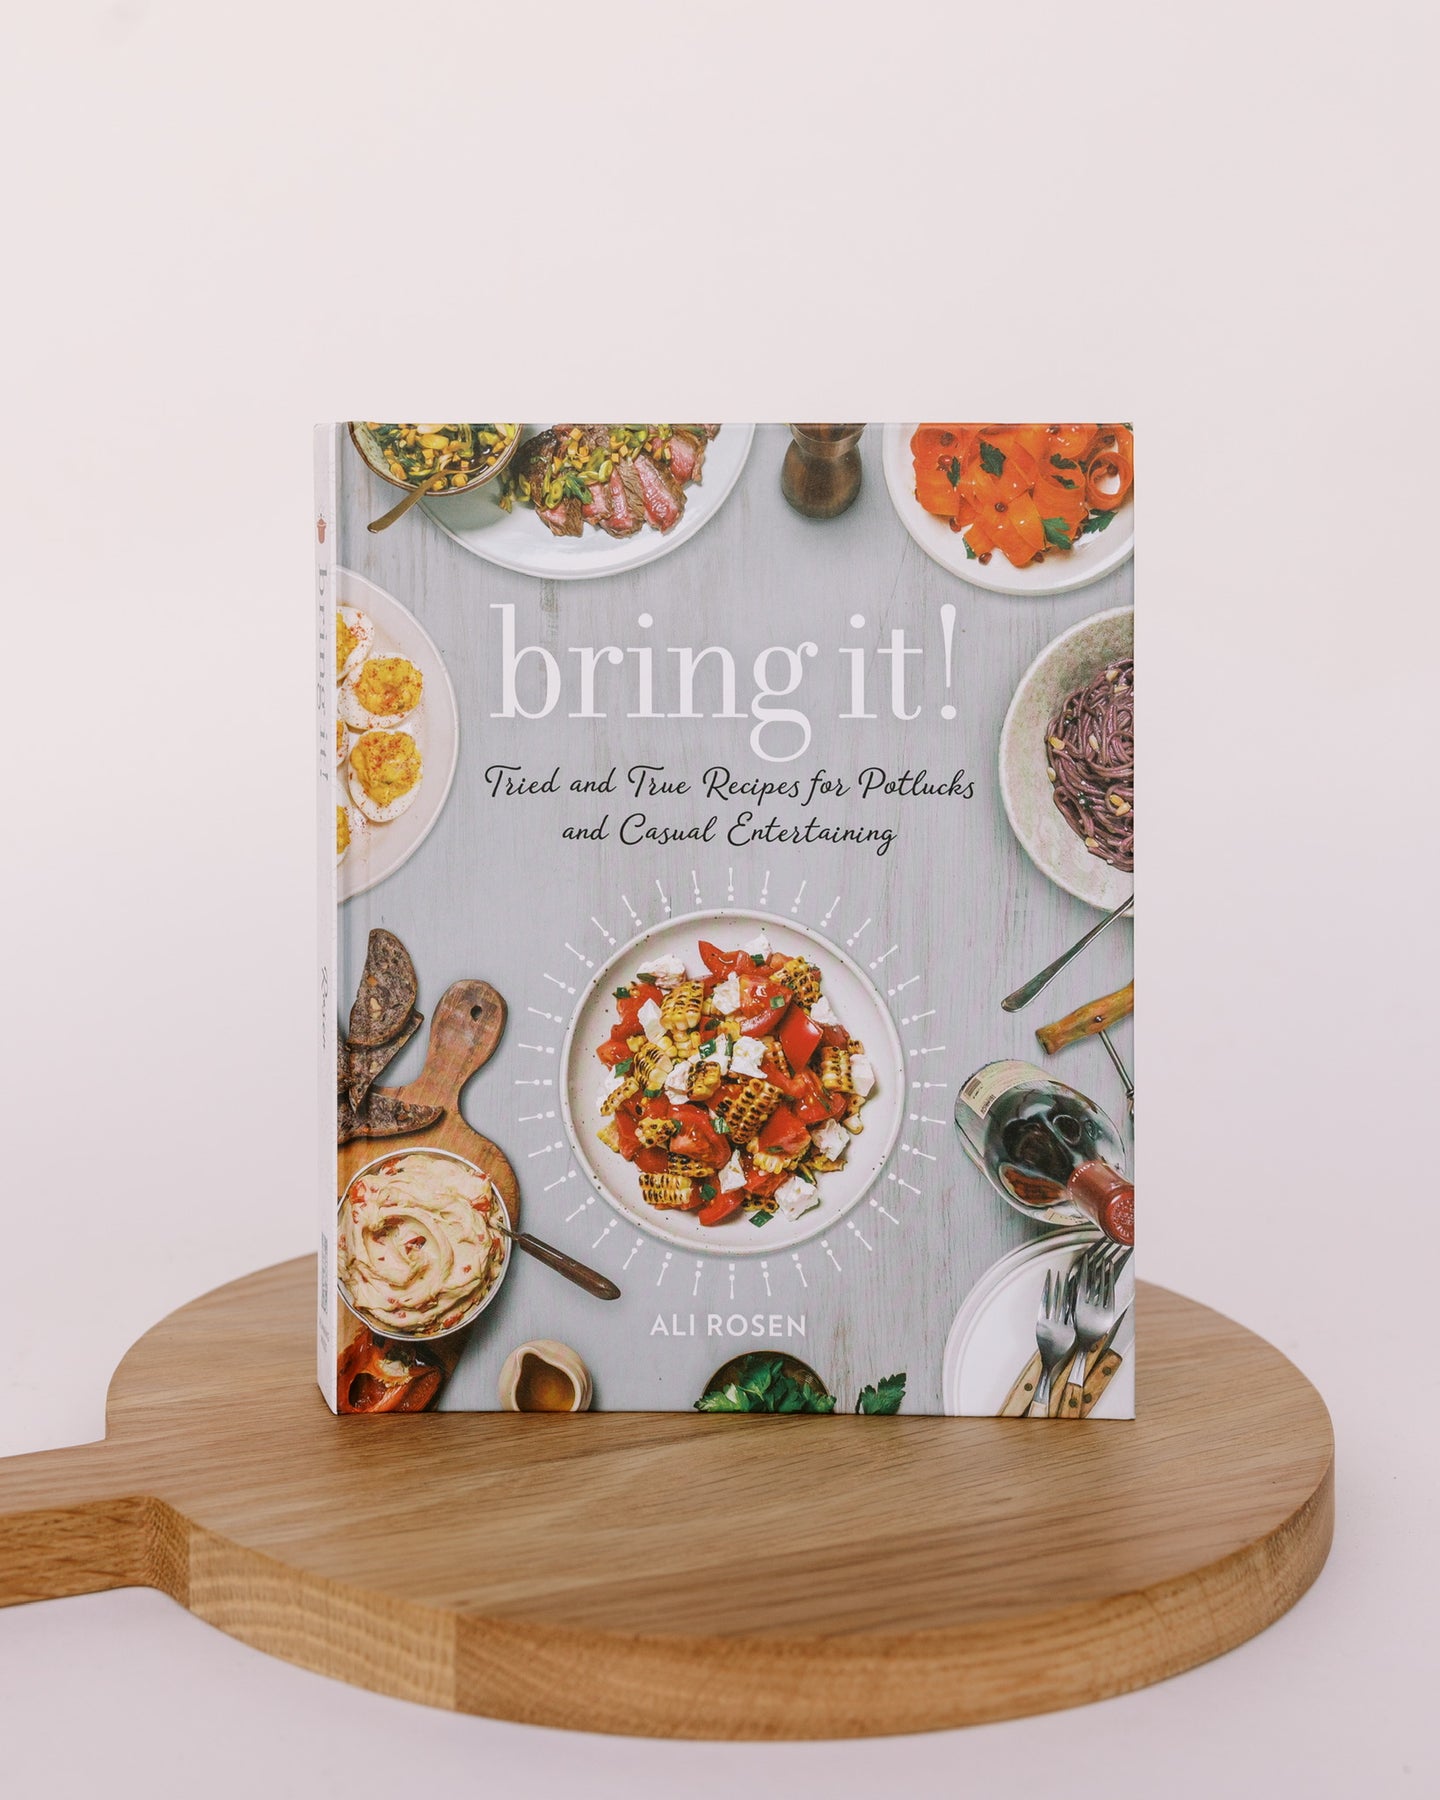 Bring It! - Tried and True Recipes for Potlucks and Casual Entertaining